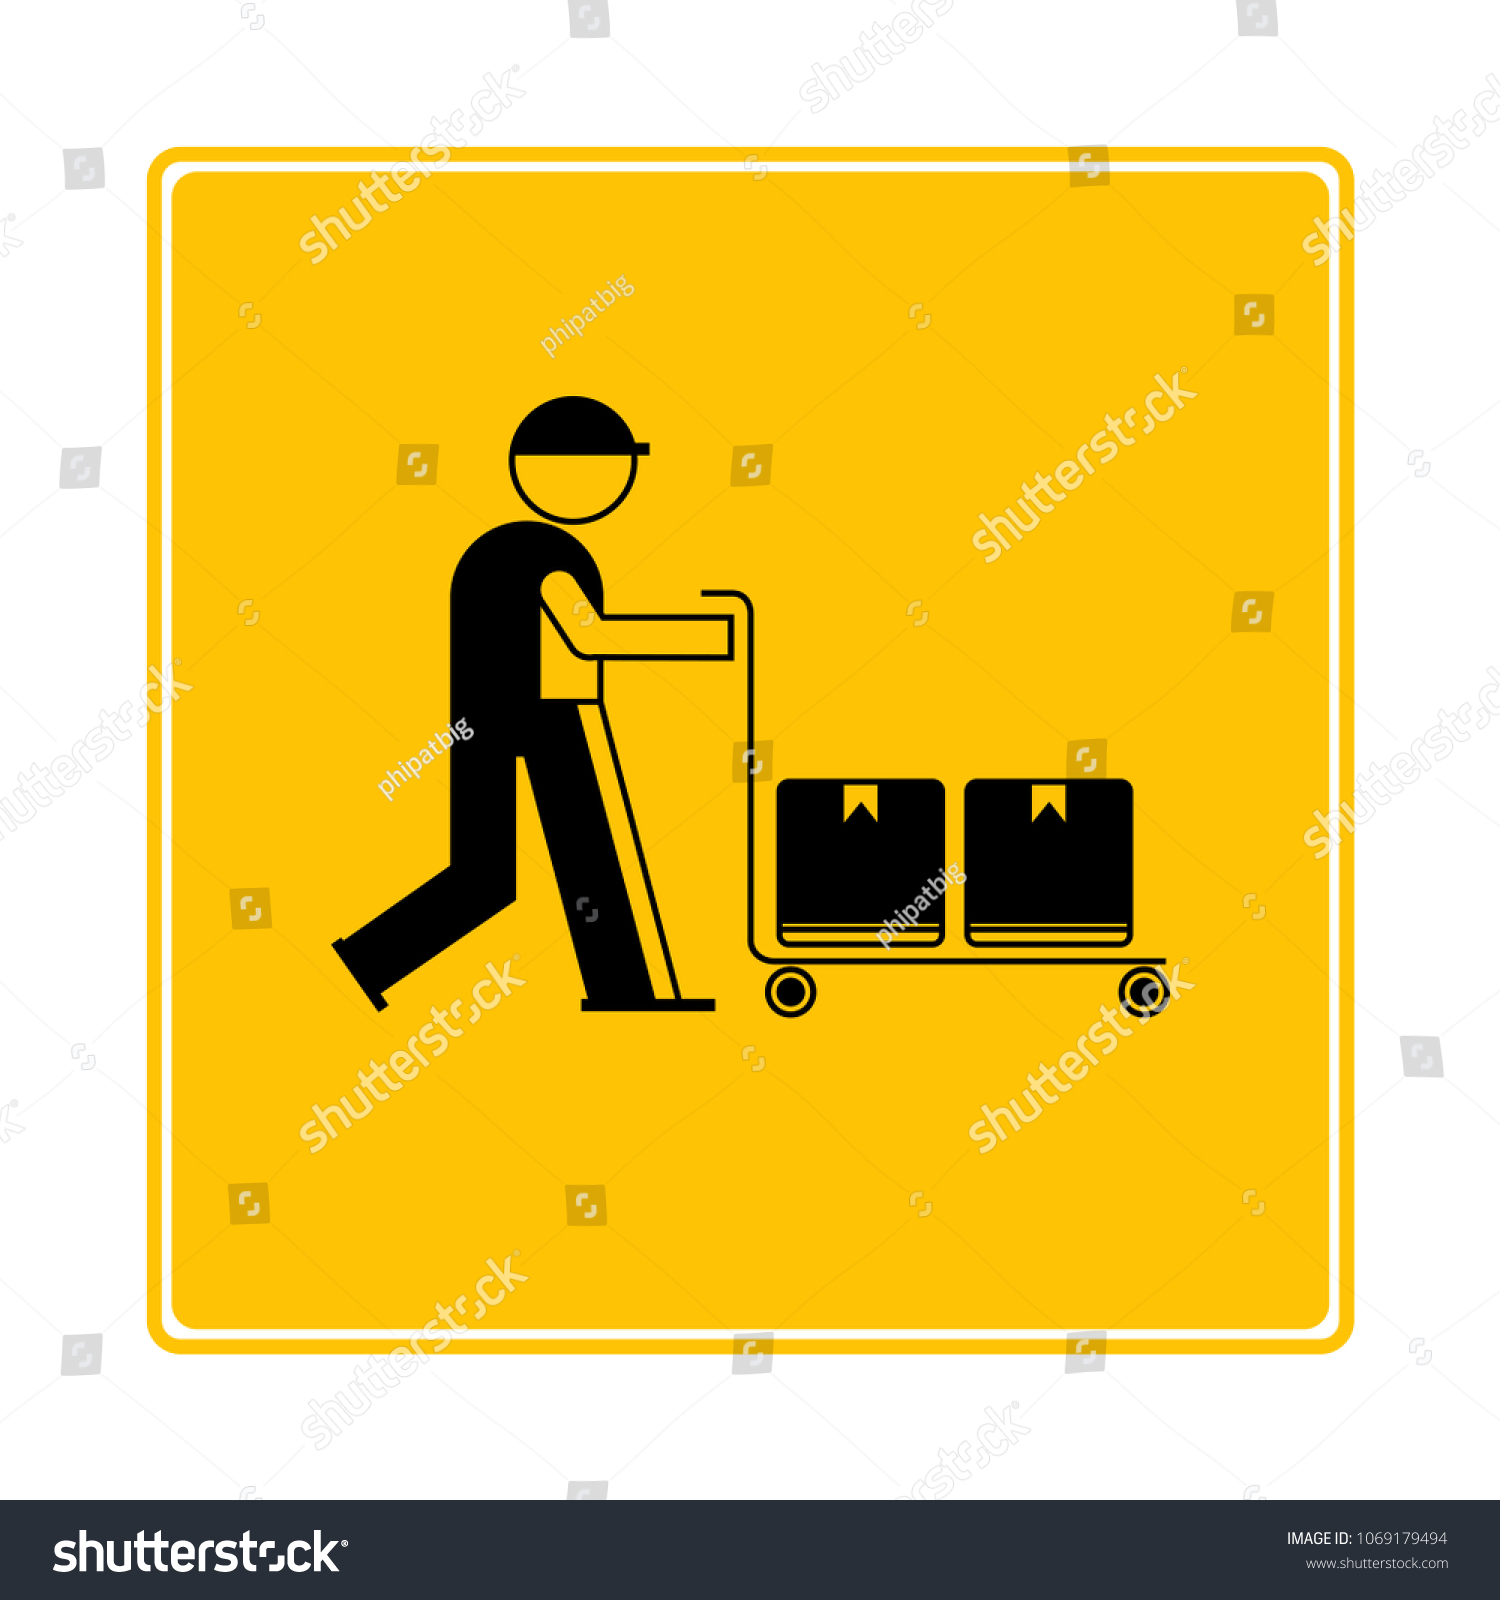 Download Warehouse Worker Trolley Boxes Icon Yellow Stock Vector Royalty Free 1069179494 Yellowimages Mockups